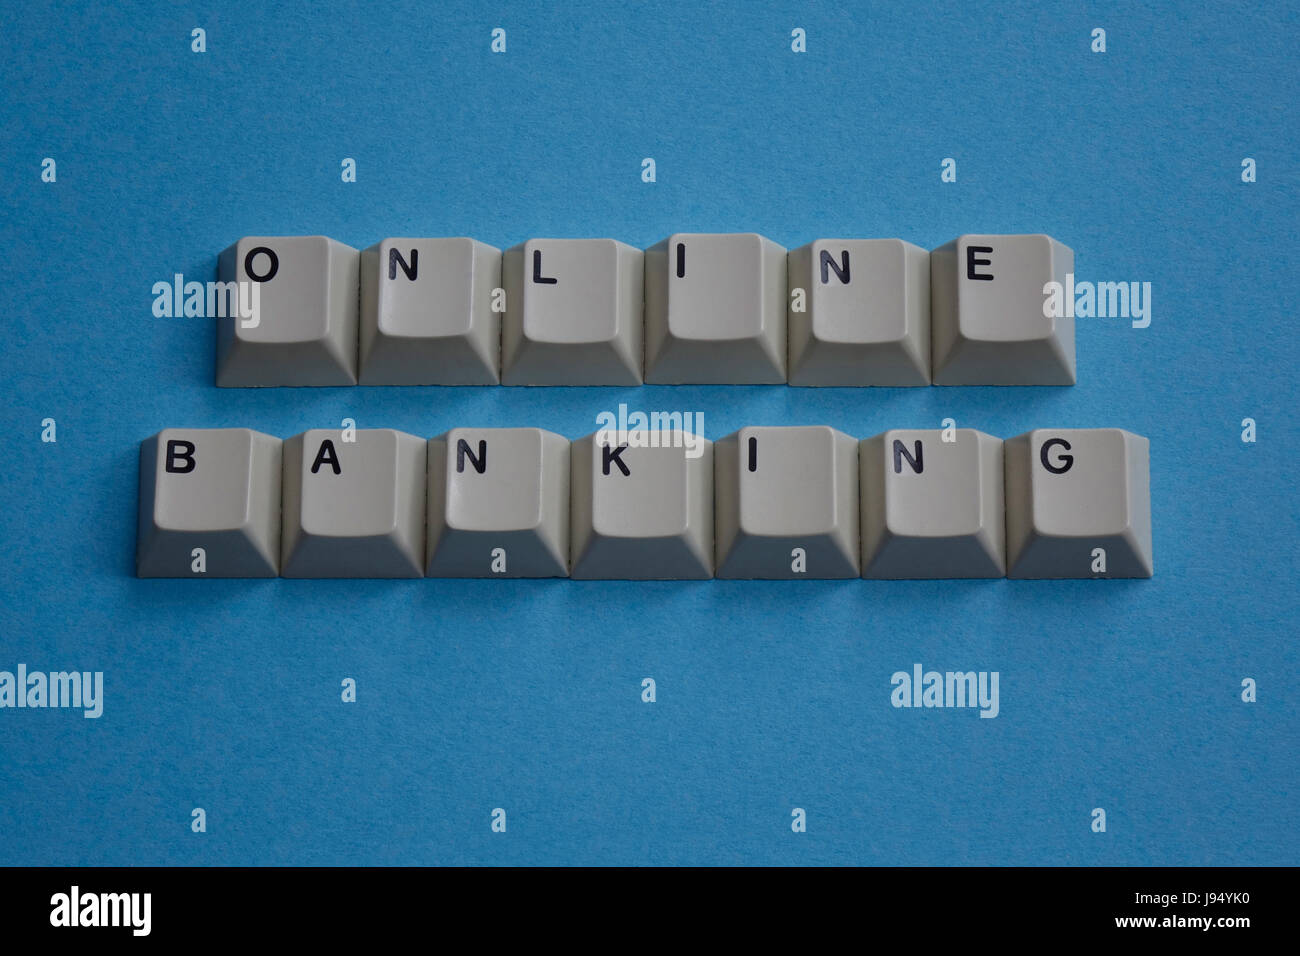 ILLUSTRATION - The phrase 'ONLINE BANKING' is spelt out with letters taken from a computer keyboard. Taken 19.02.2017. Online banking is an overarching term that applies to carrying out banking transactions independently of physical bank branches and their opening times. Online banking, electronic banking or home banking are data transfer processes or transactions carried out with the help of PCs, smartphones and other terminal devices, or over telephones or fax devices (telebanking, telephone banking). In 2014, already 55 per cent of Germans took care of their bank transactions online. - NO W Stock Photo